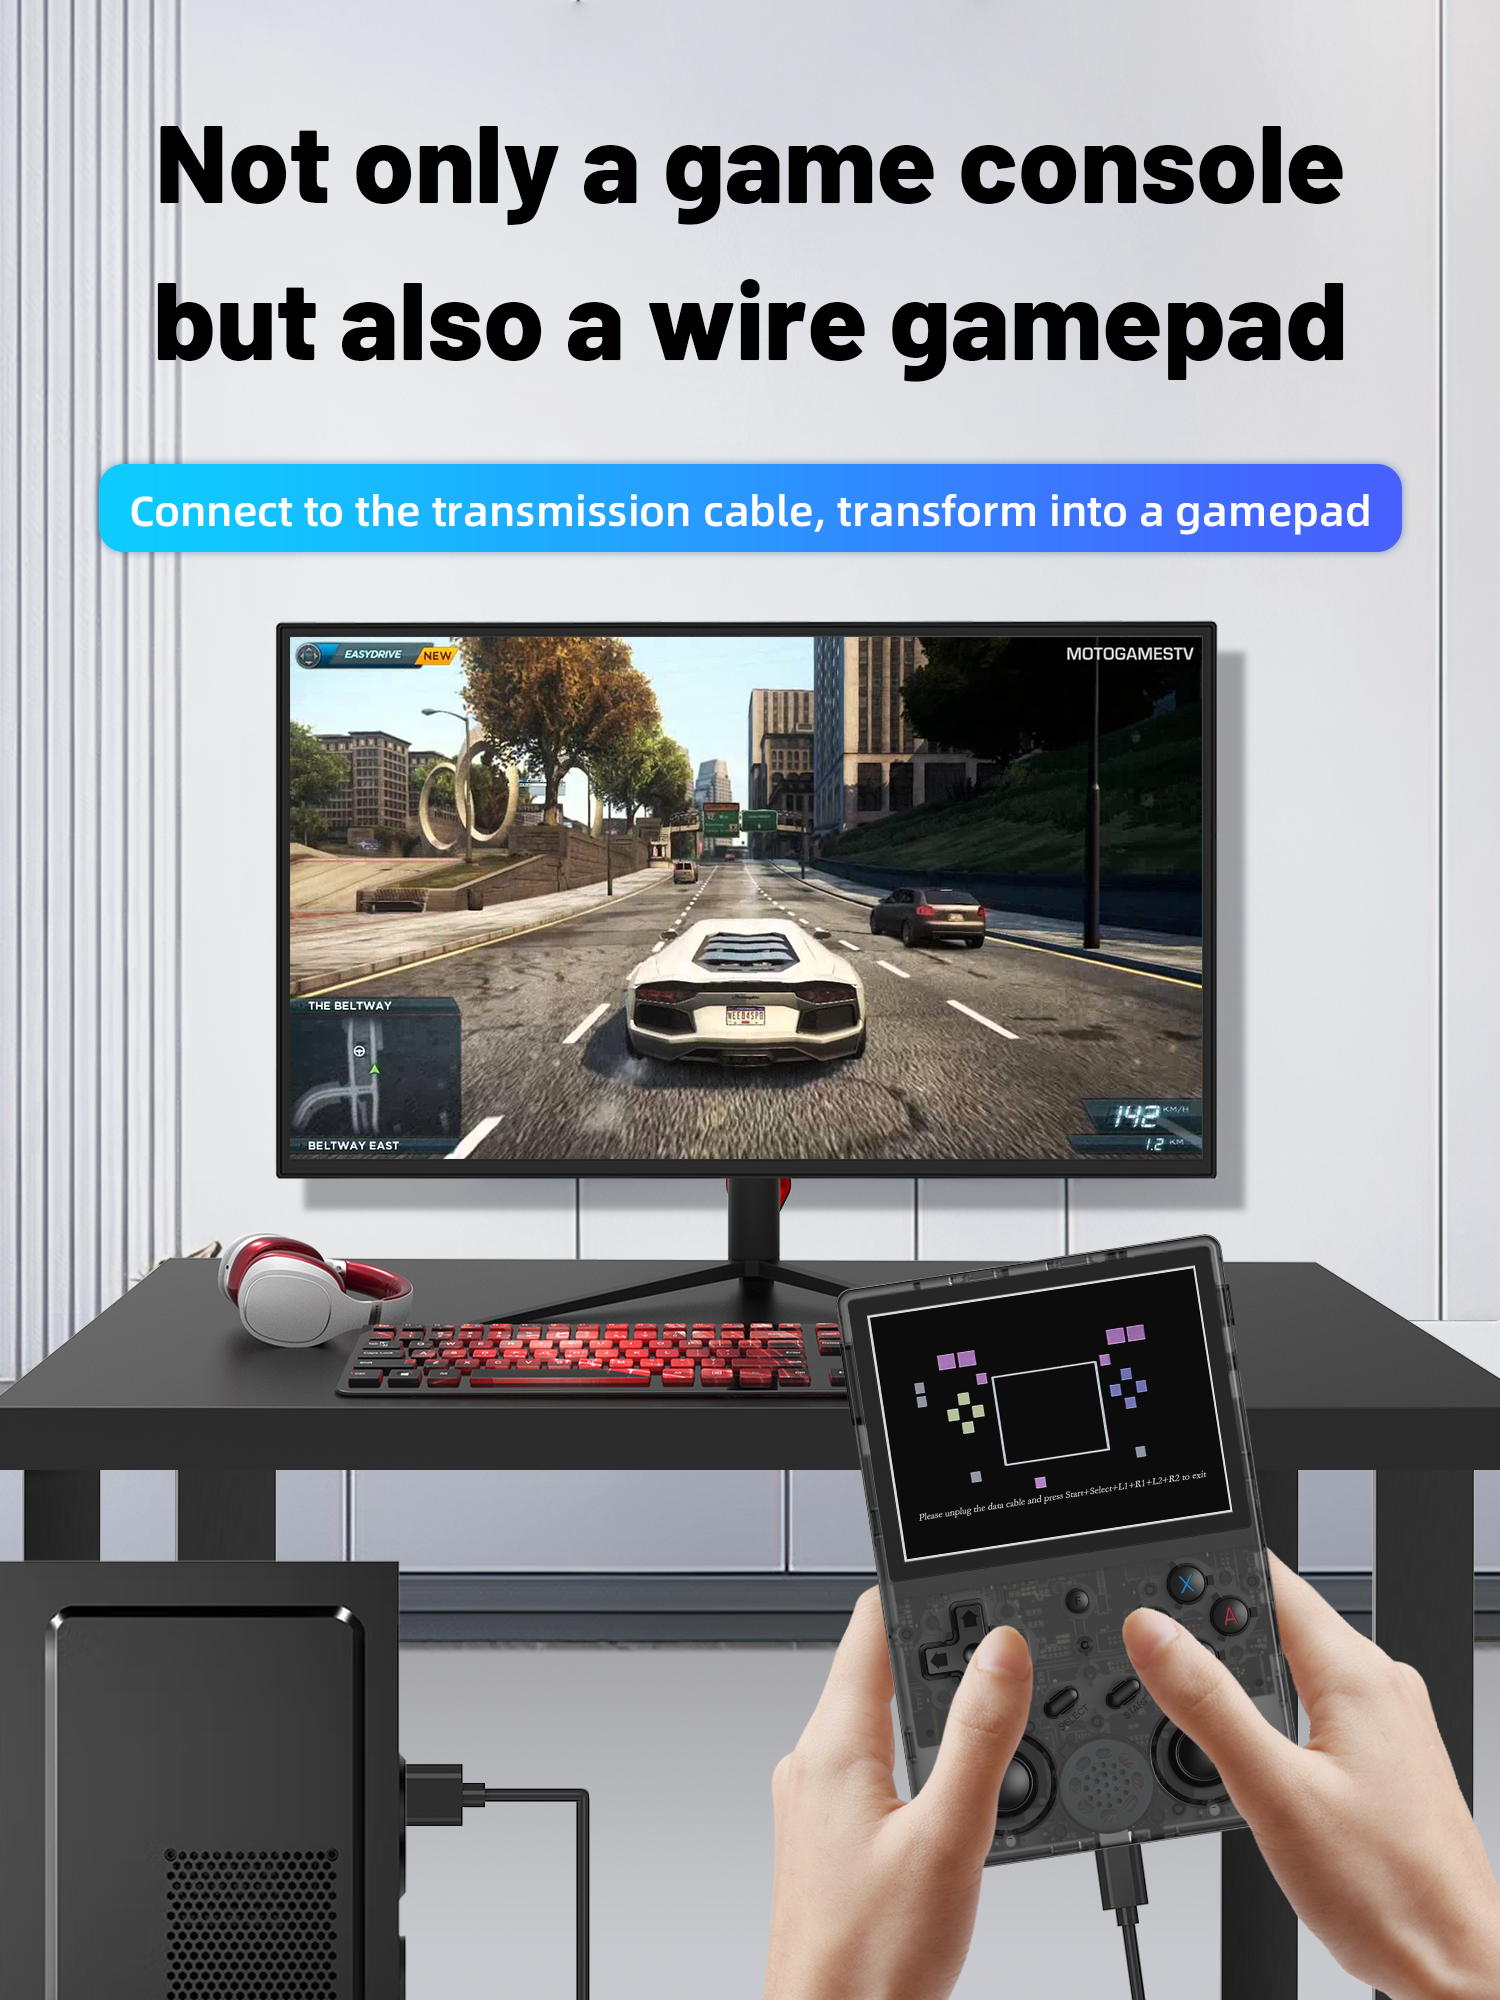 ANBERNIC RG353V Android Linux Dual OS Video Game Console LPDDR4 2GB RAM eMMC 5.1 32GB ROM 5G WiF BT4.2 3.5 inch IPS Full View Retro Handheld Game Player